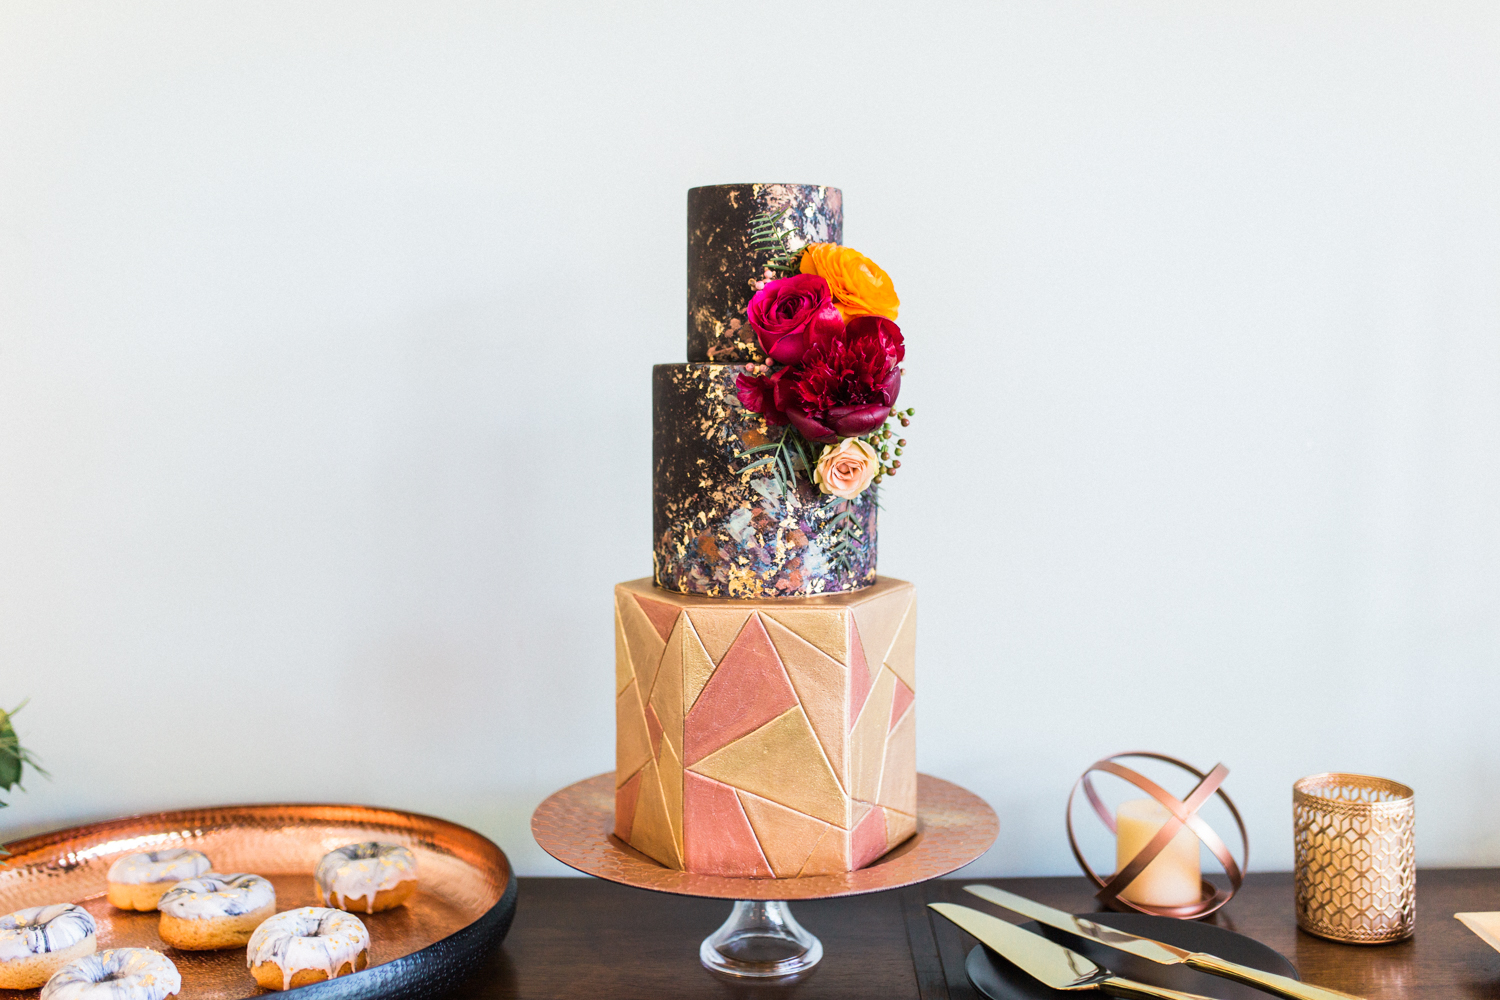 Floral wedding cake by Laura Ford